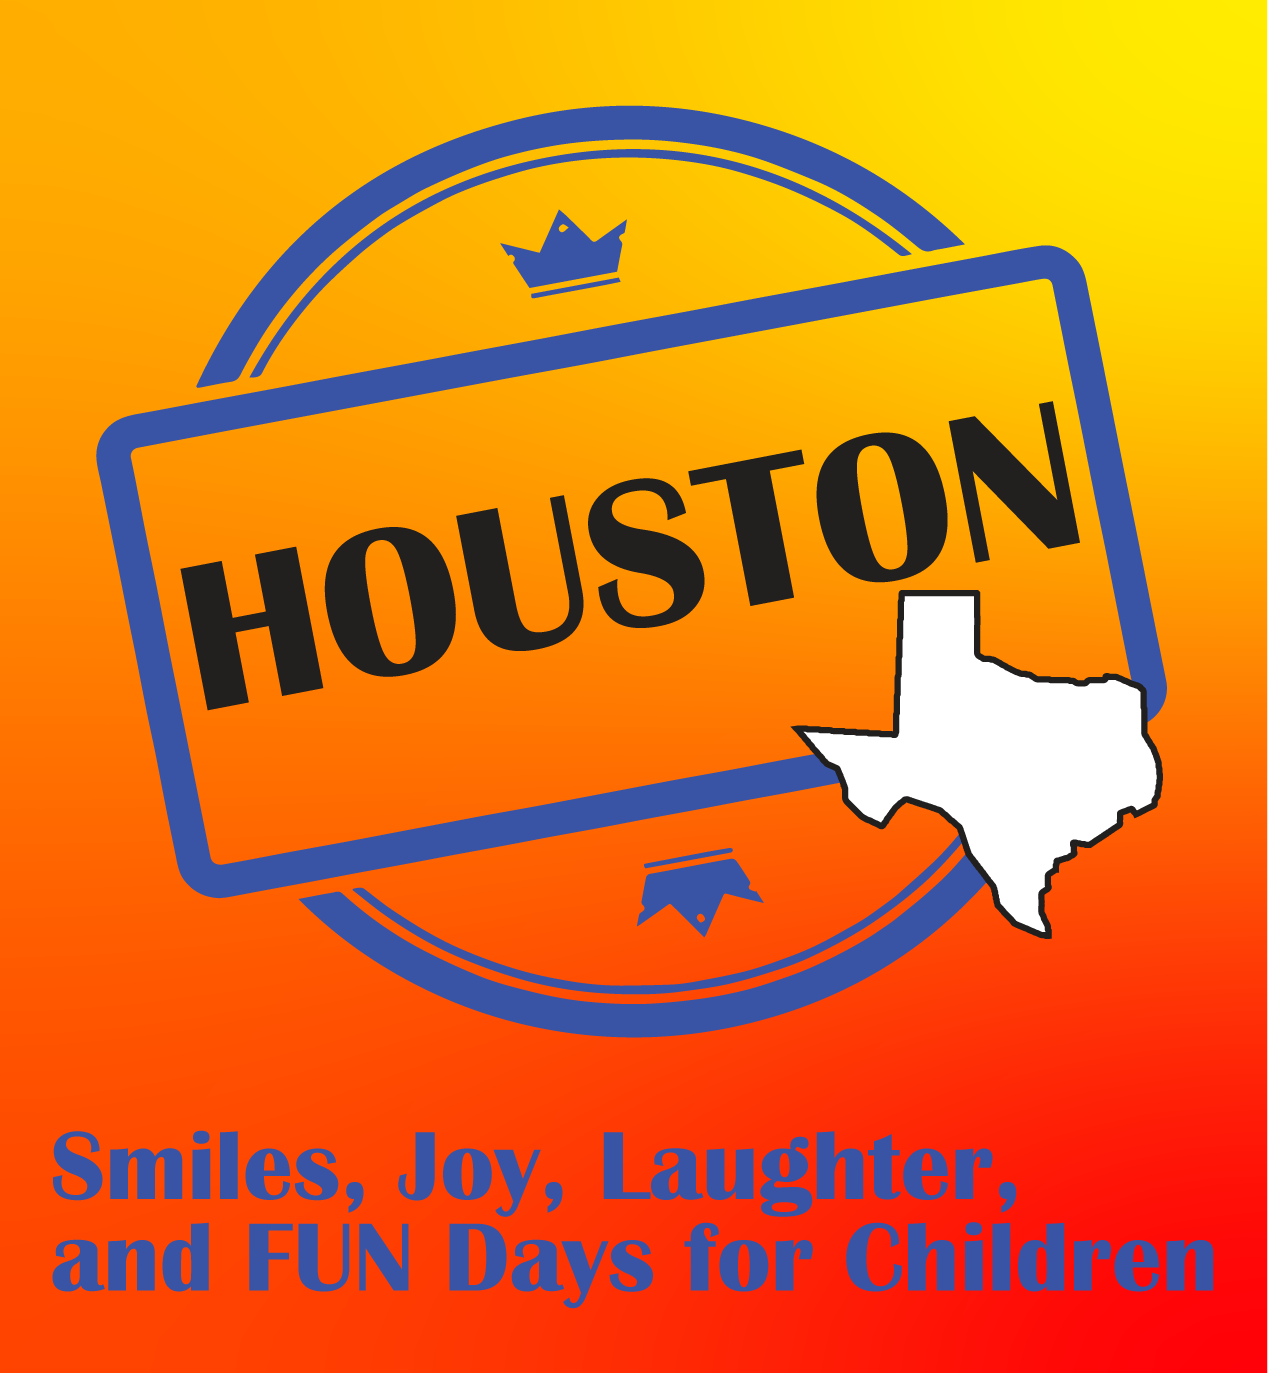 Image for Smiles, Joy, Laughter, and Fun Days for Children - Houston